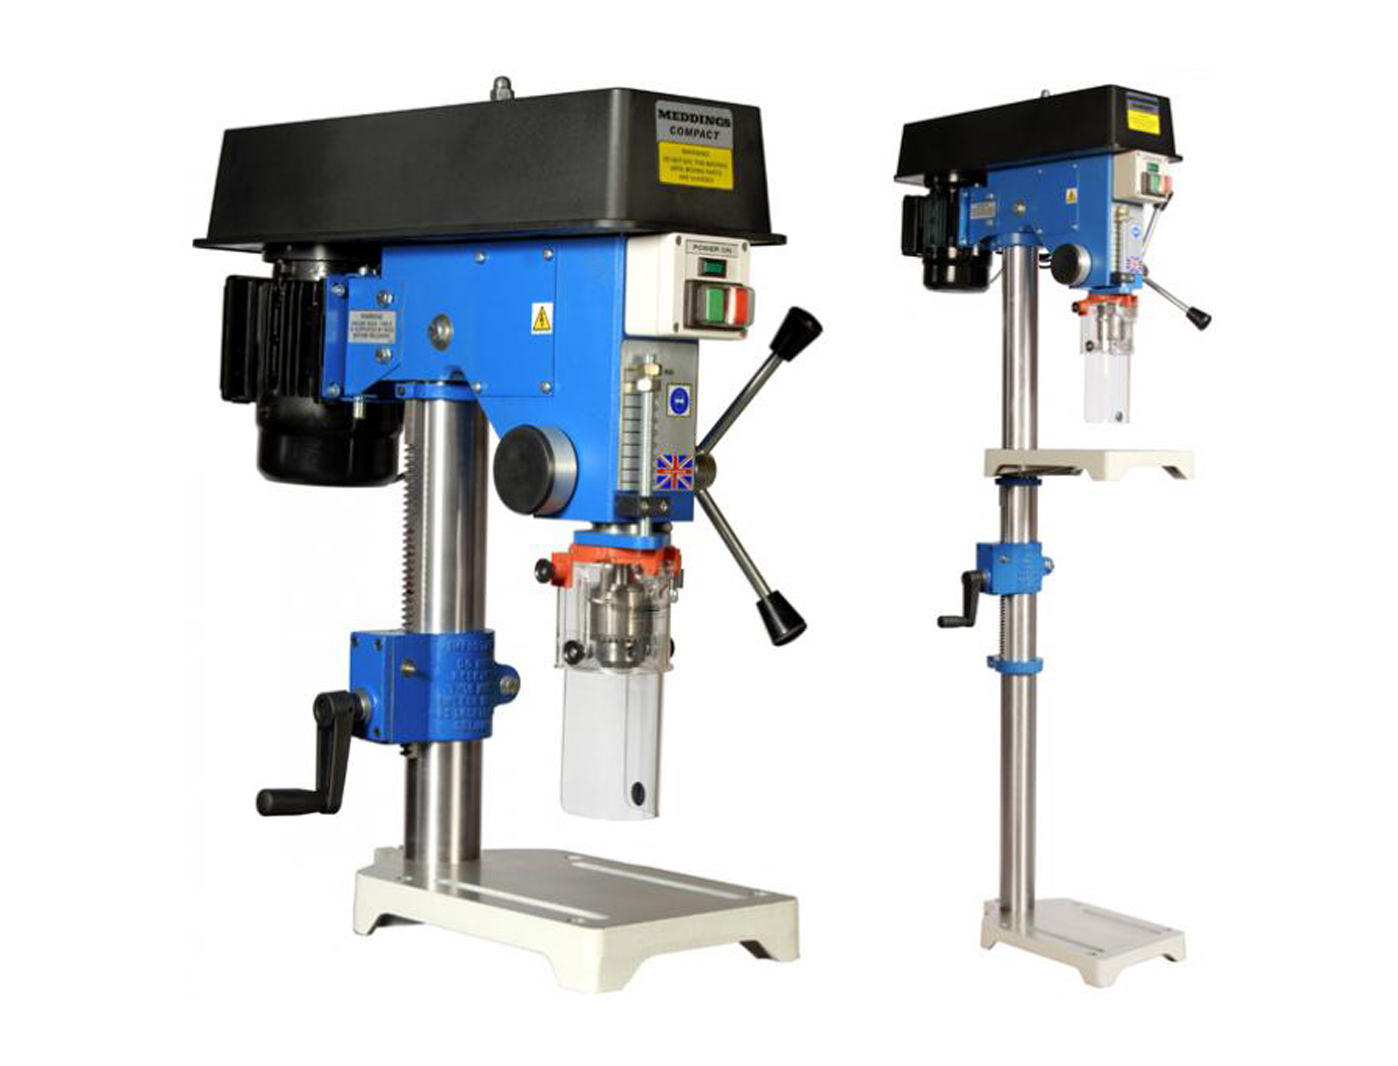 Education Meddings Compact Drilling Machines